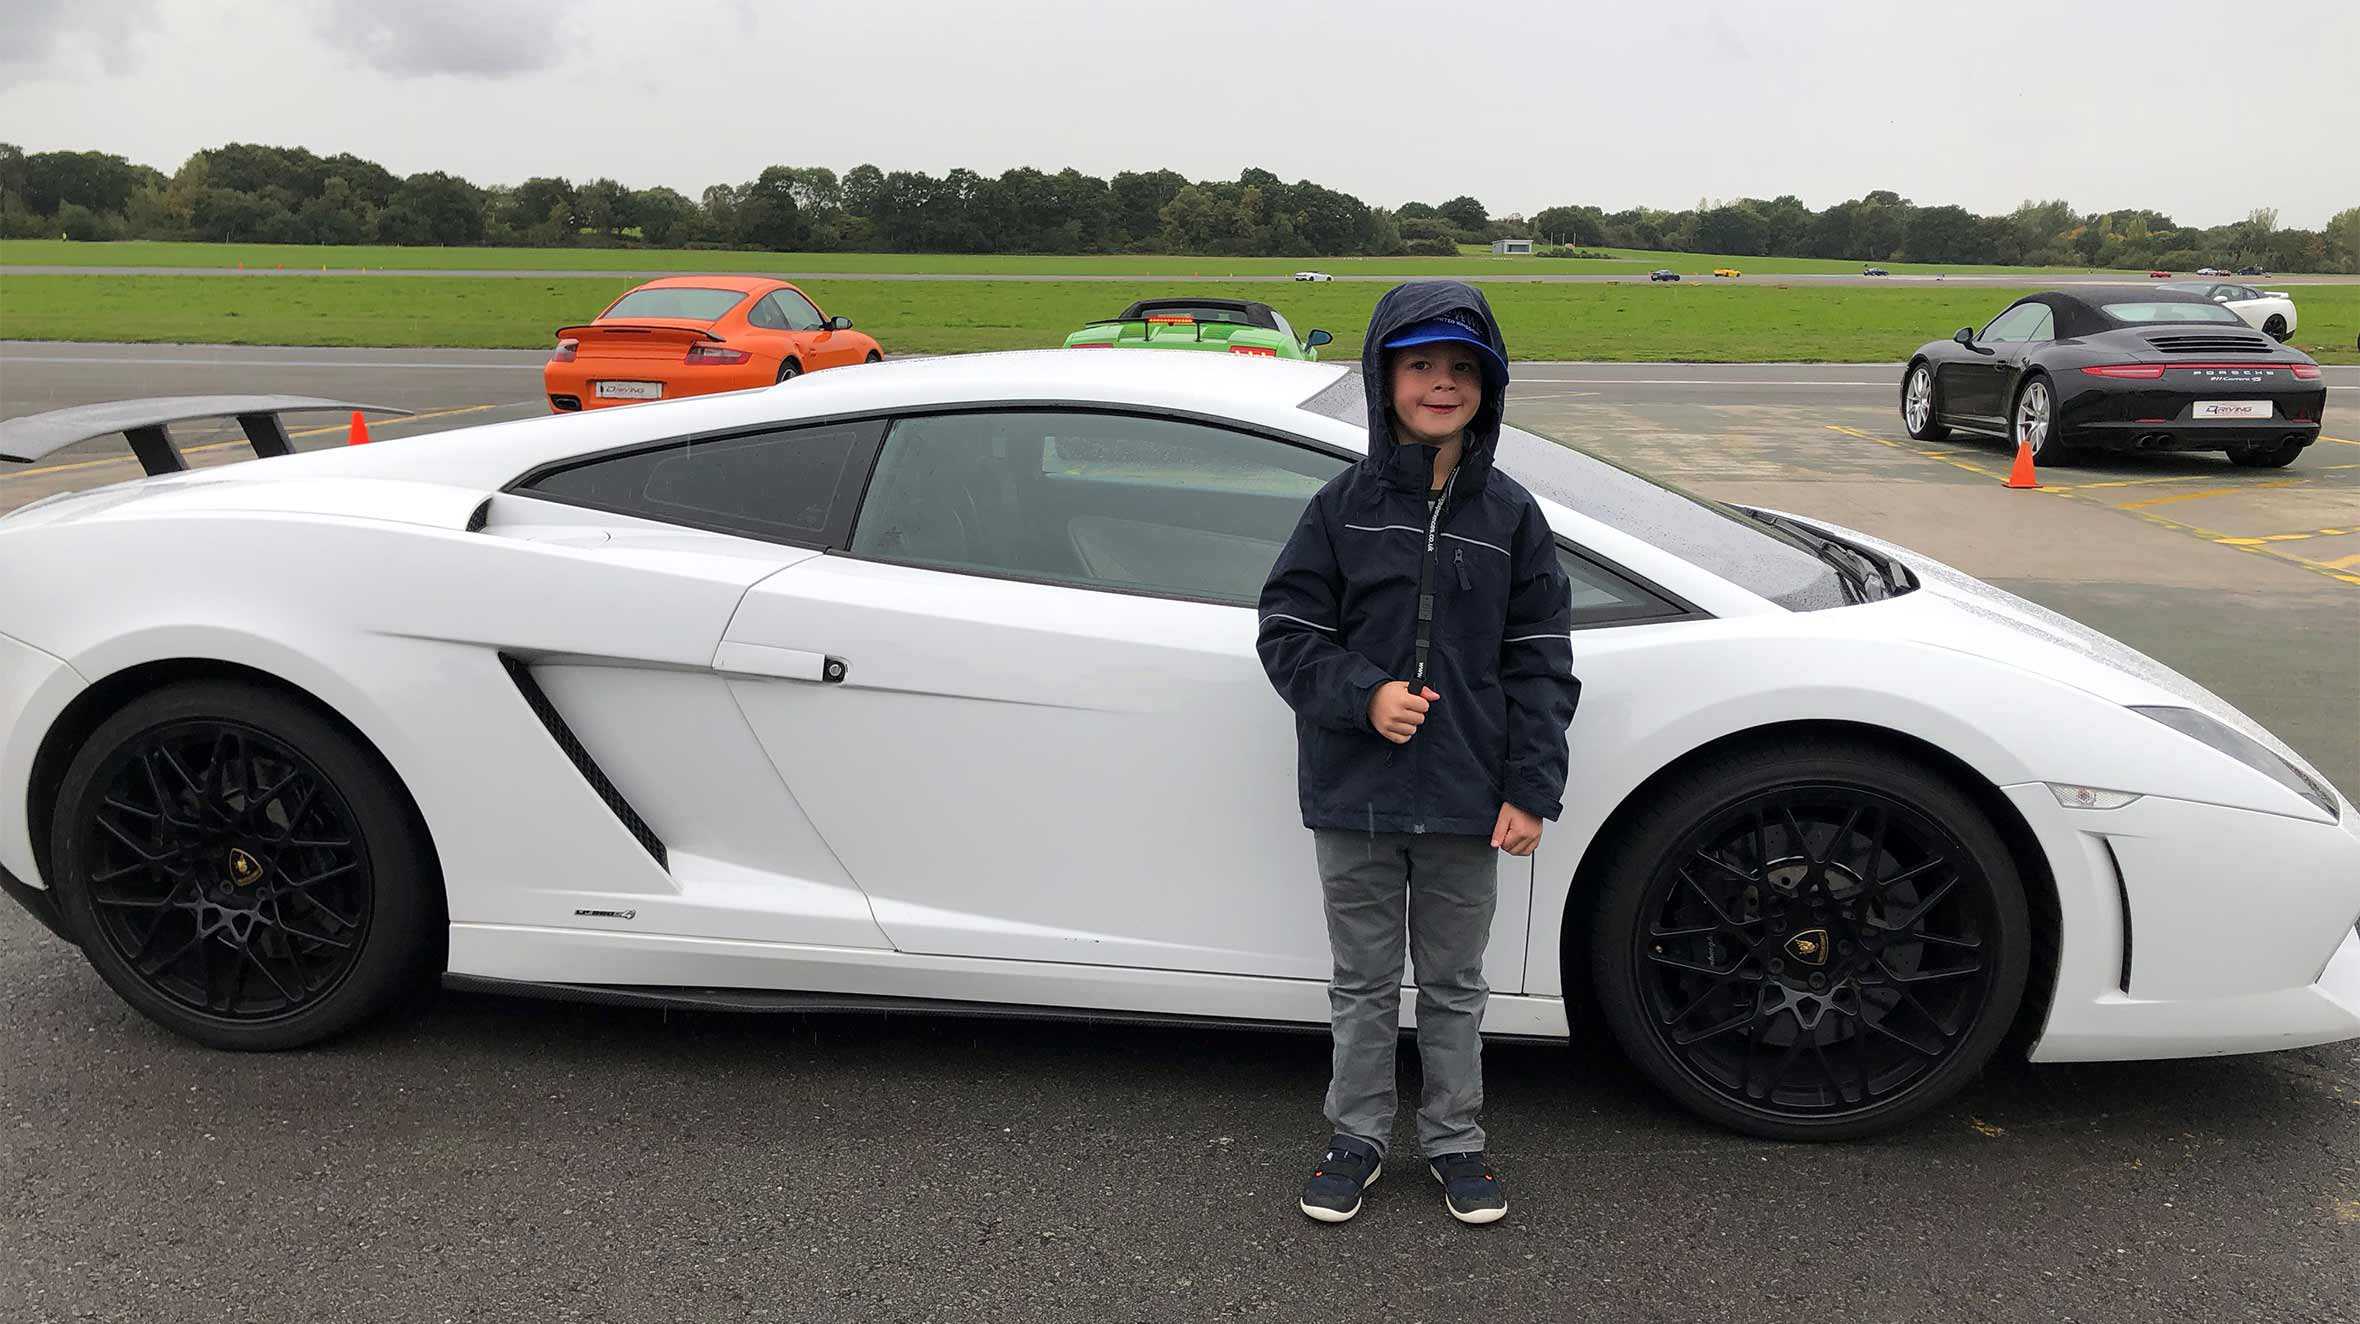 Alex standing in front of a white Lamborghini, with other sports cars in the background